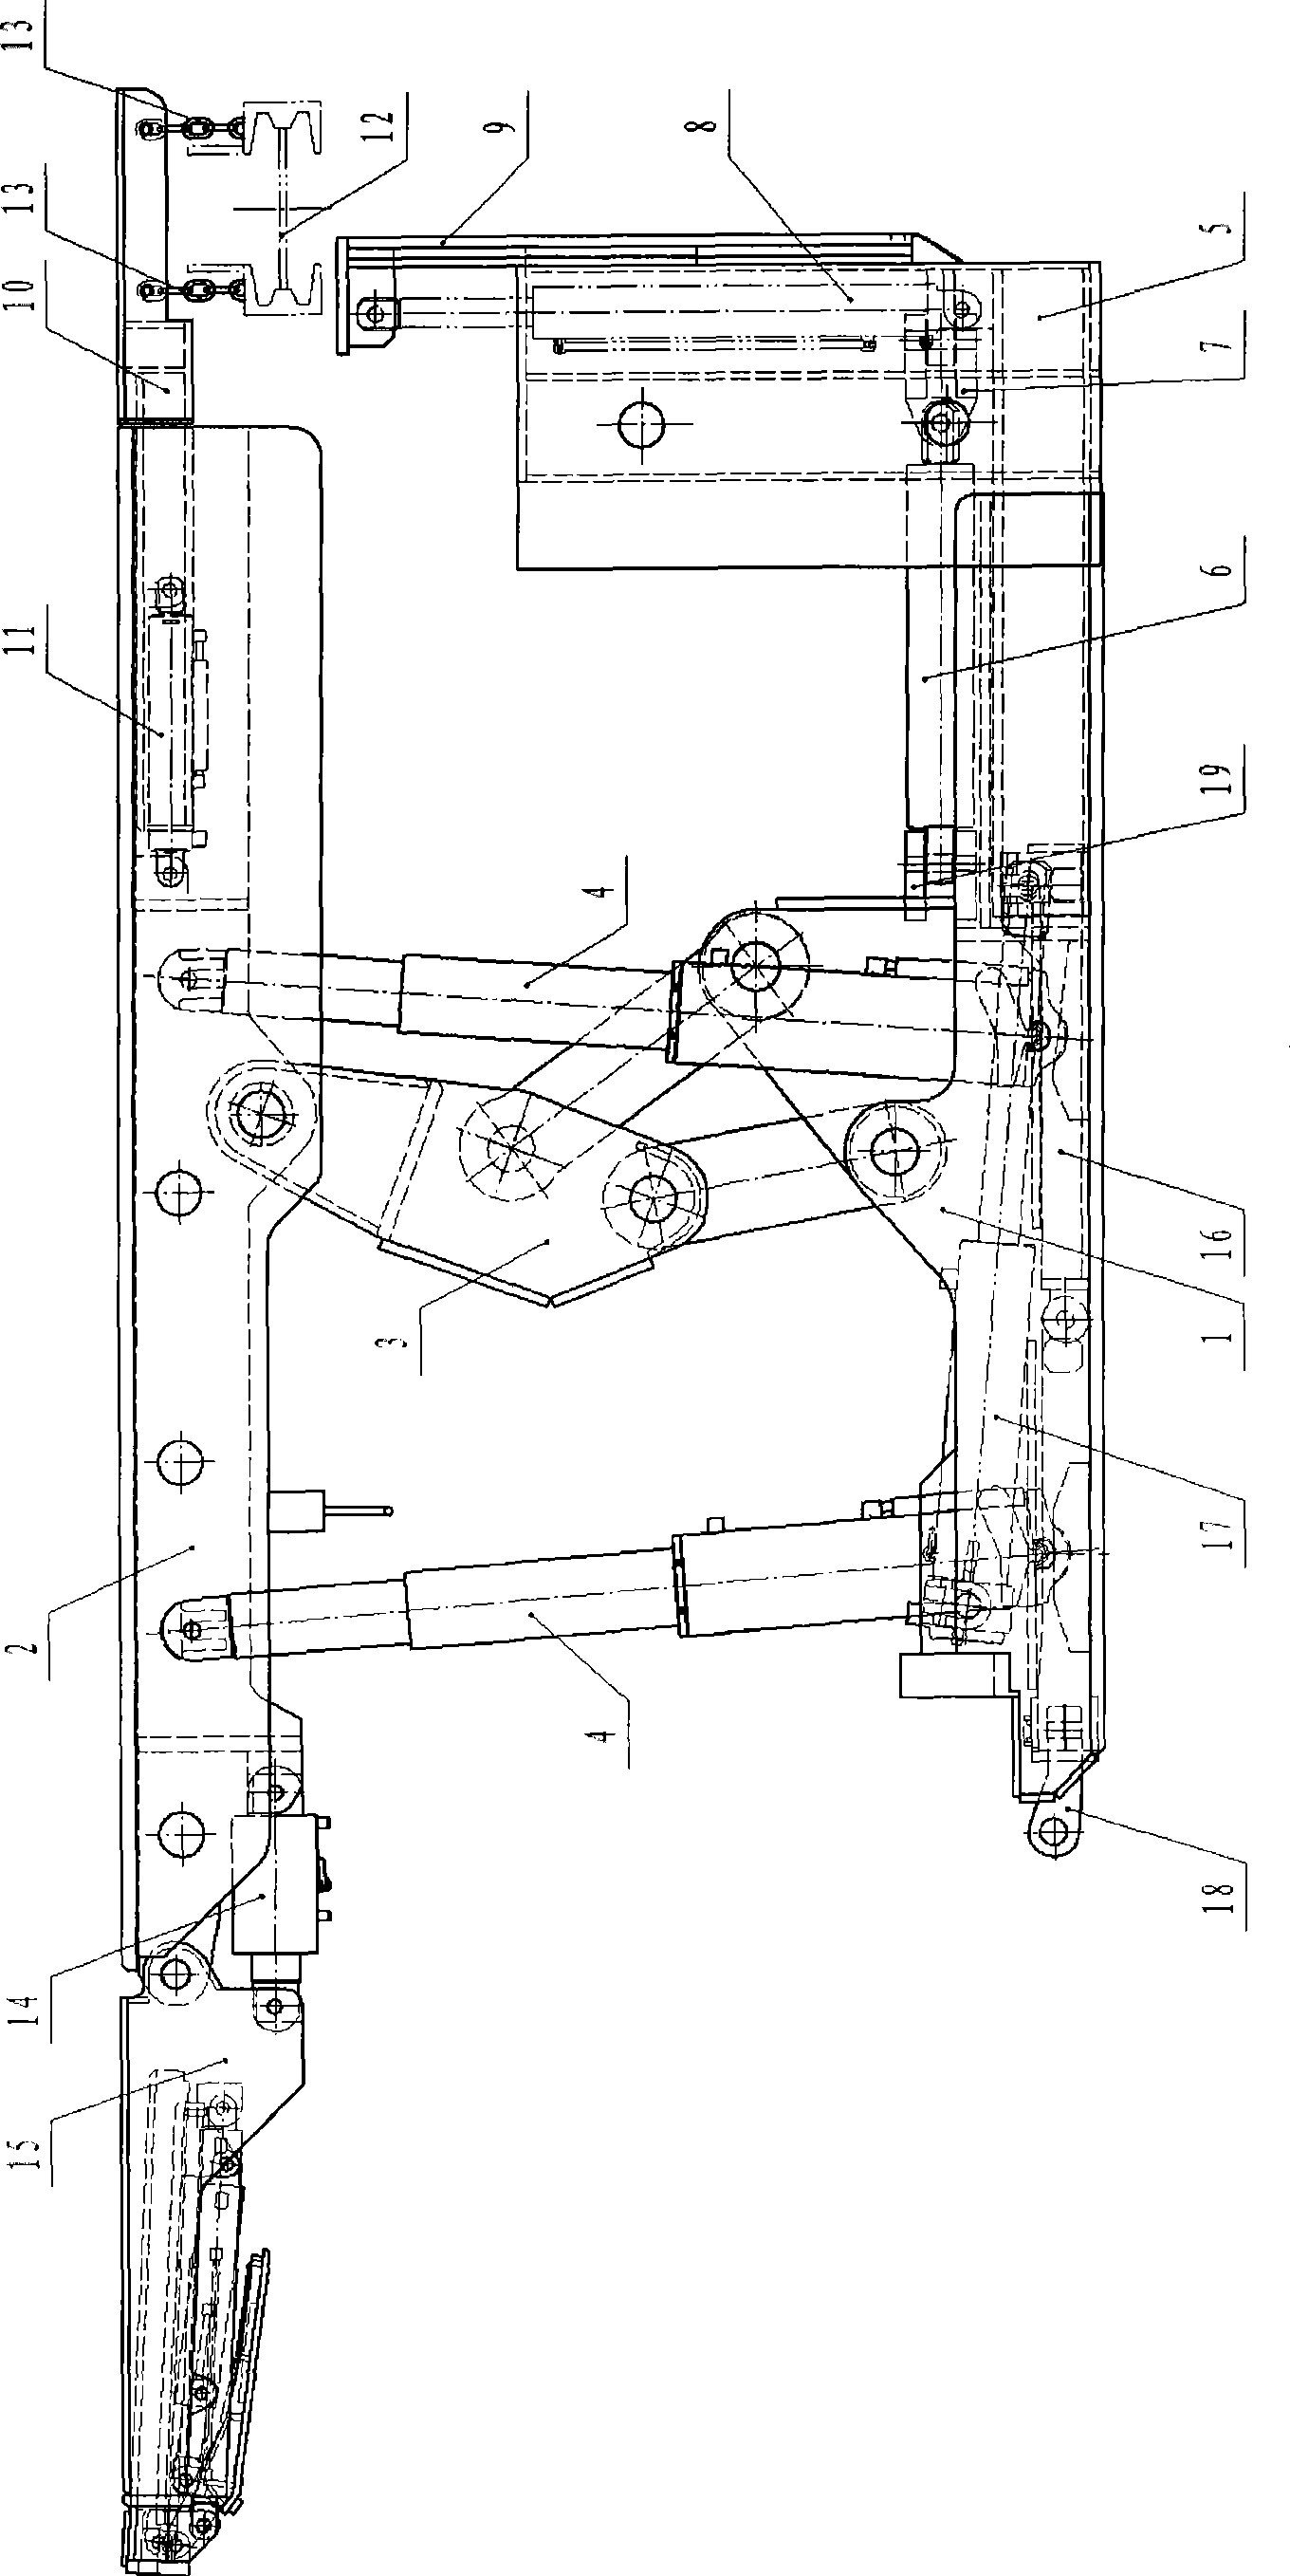 Formwork support with filling behind support